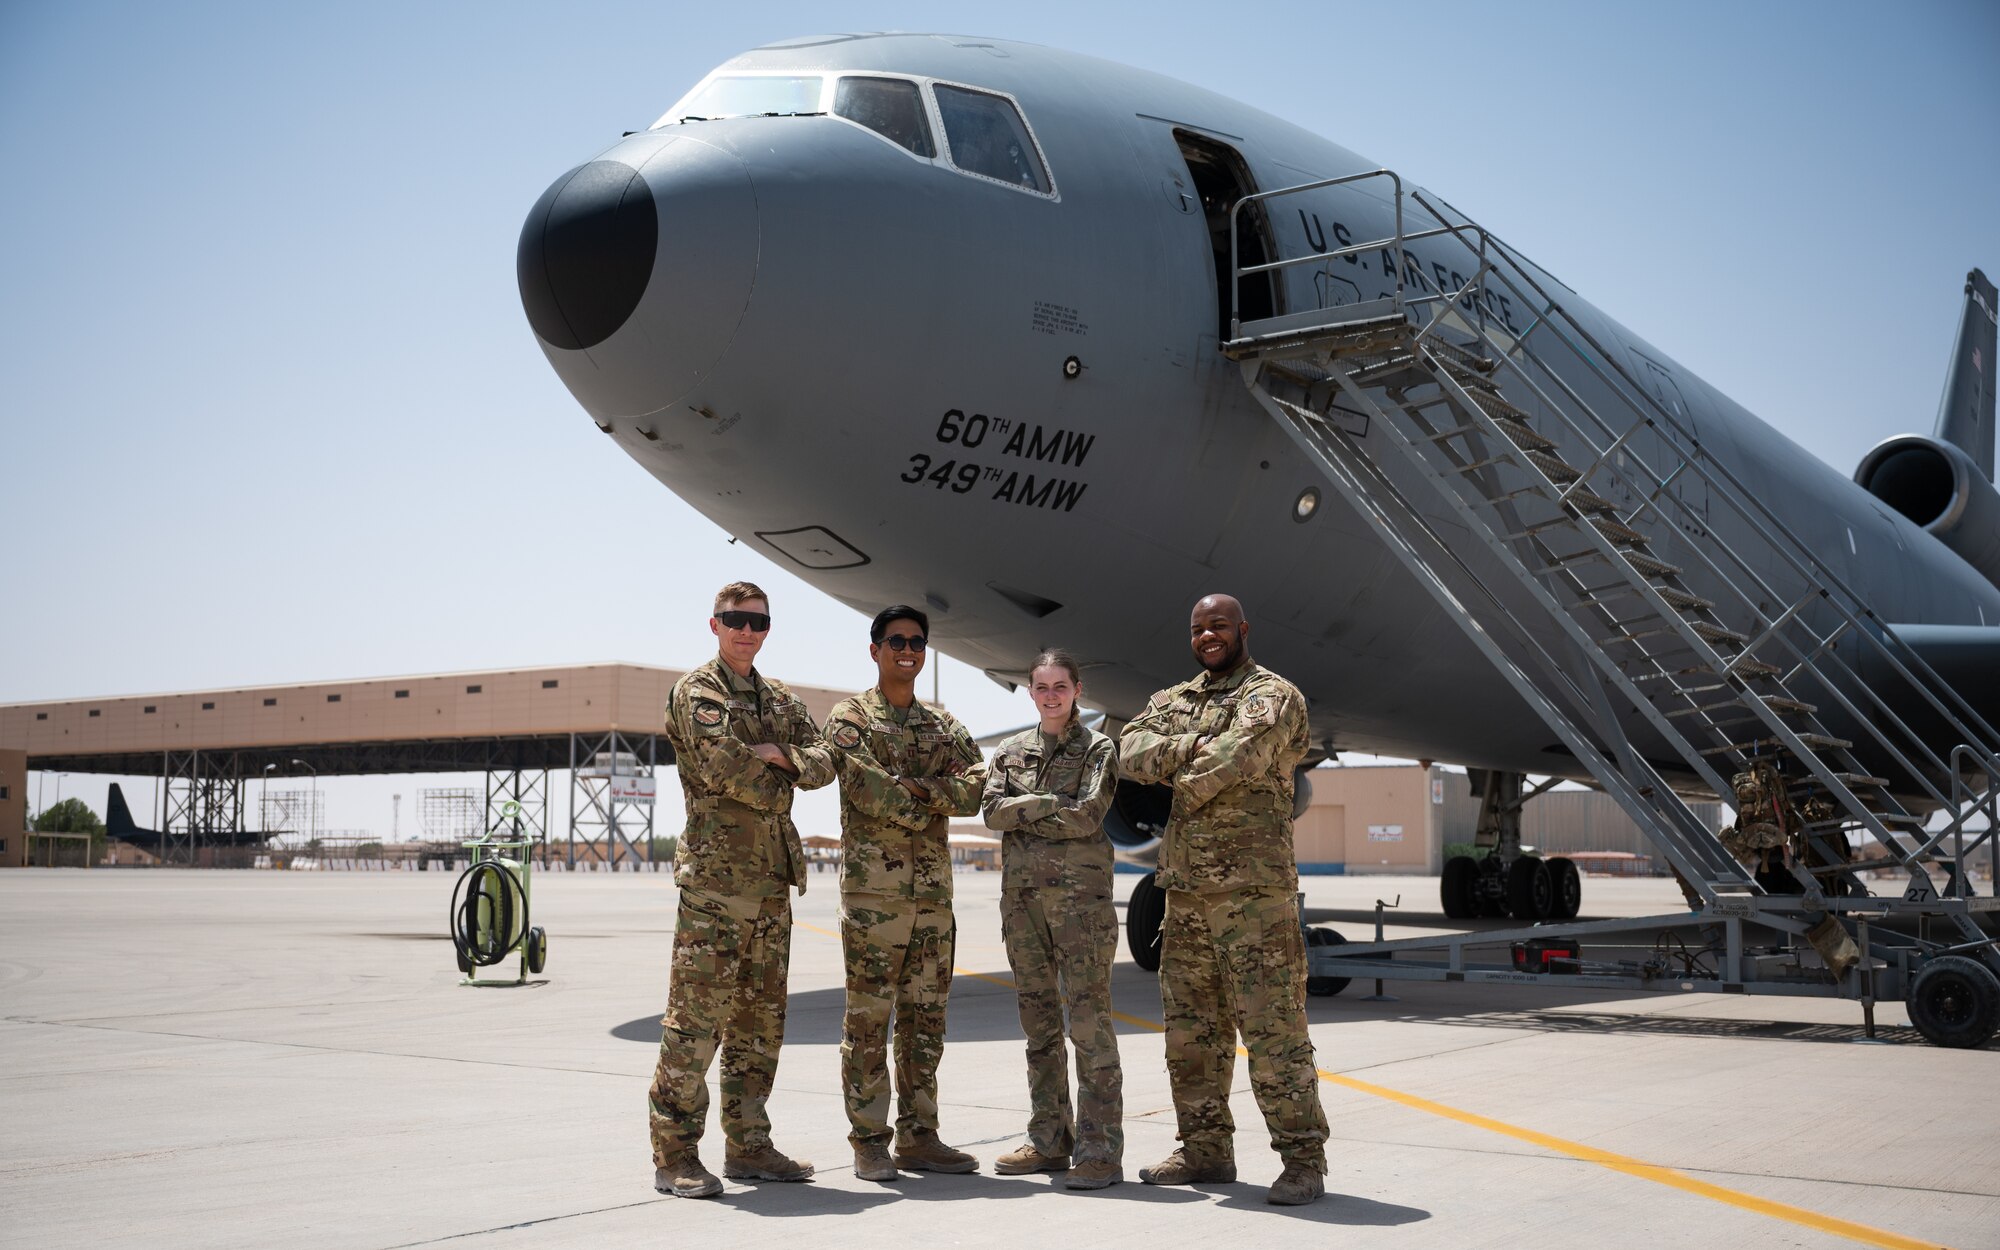 U.S. Air Force Capt. Gavin Owens 908th Expeditionary Air Refueling Squadron aircraft commander, Capt. Kevin Cabusora, 908th EARS aircraft commander, Airman 1st Class Lauren Hotaling, 908th EARS in-flight refueling specialist, and Tech. Sgt. Justin Lassiter, 908th EARS instructor flight engineer, pose for a photo in front of a KC-10 Extender at Prince Sultan Air Base, Kingdom of Saudi Arabia, April 7, 2022. The crew deployed from the 305th Air Mobility Wing, McGuire Air Force Base, New Jersey, and are the last crew to fly a KC-10 sortie deployed. McGuire AFB will cease their KC-10 deployments as the base is transitioning to fly the KC-46 Pegasus. (U.S. Air Force photo by Senior Airman Jacob B. Wrightsman)